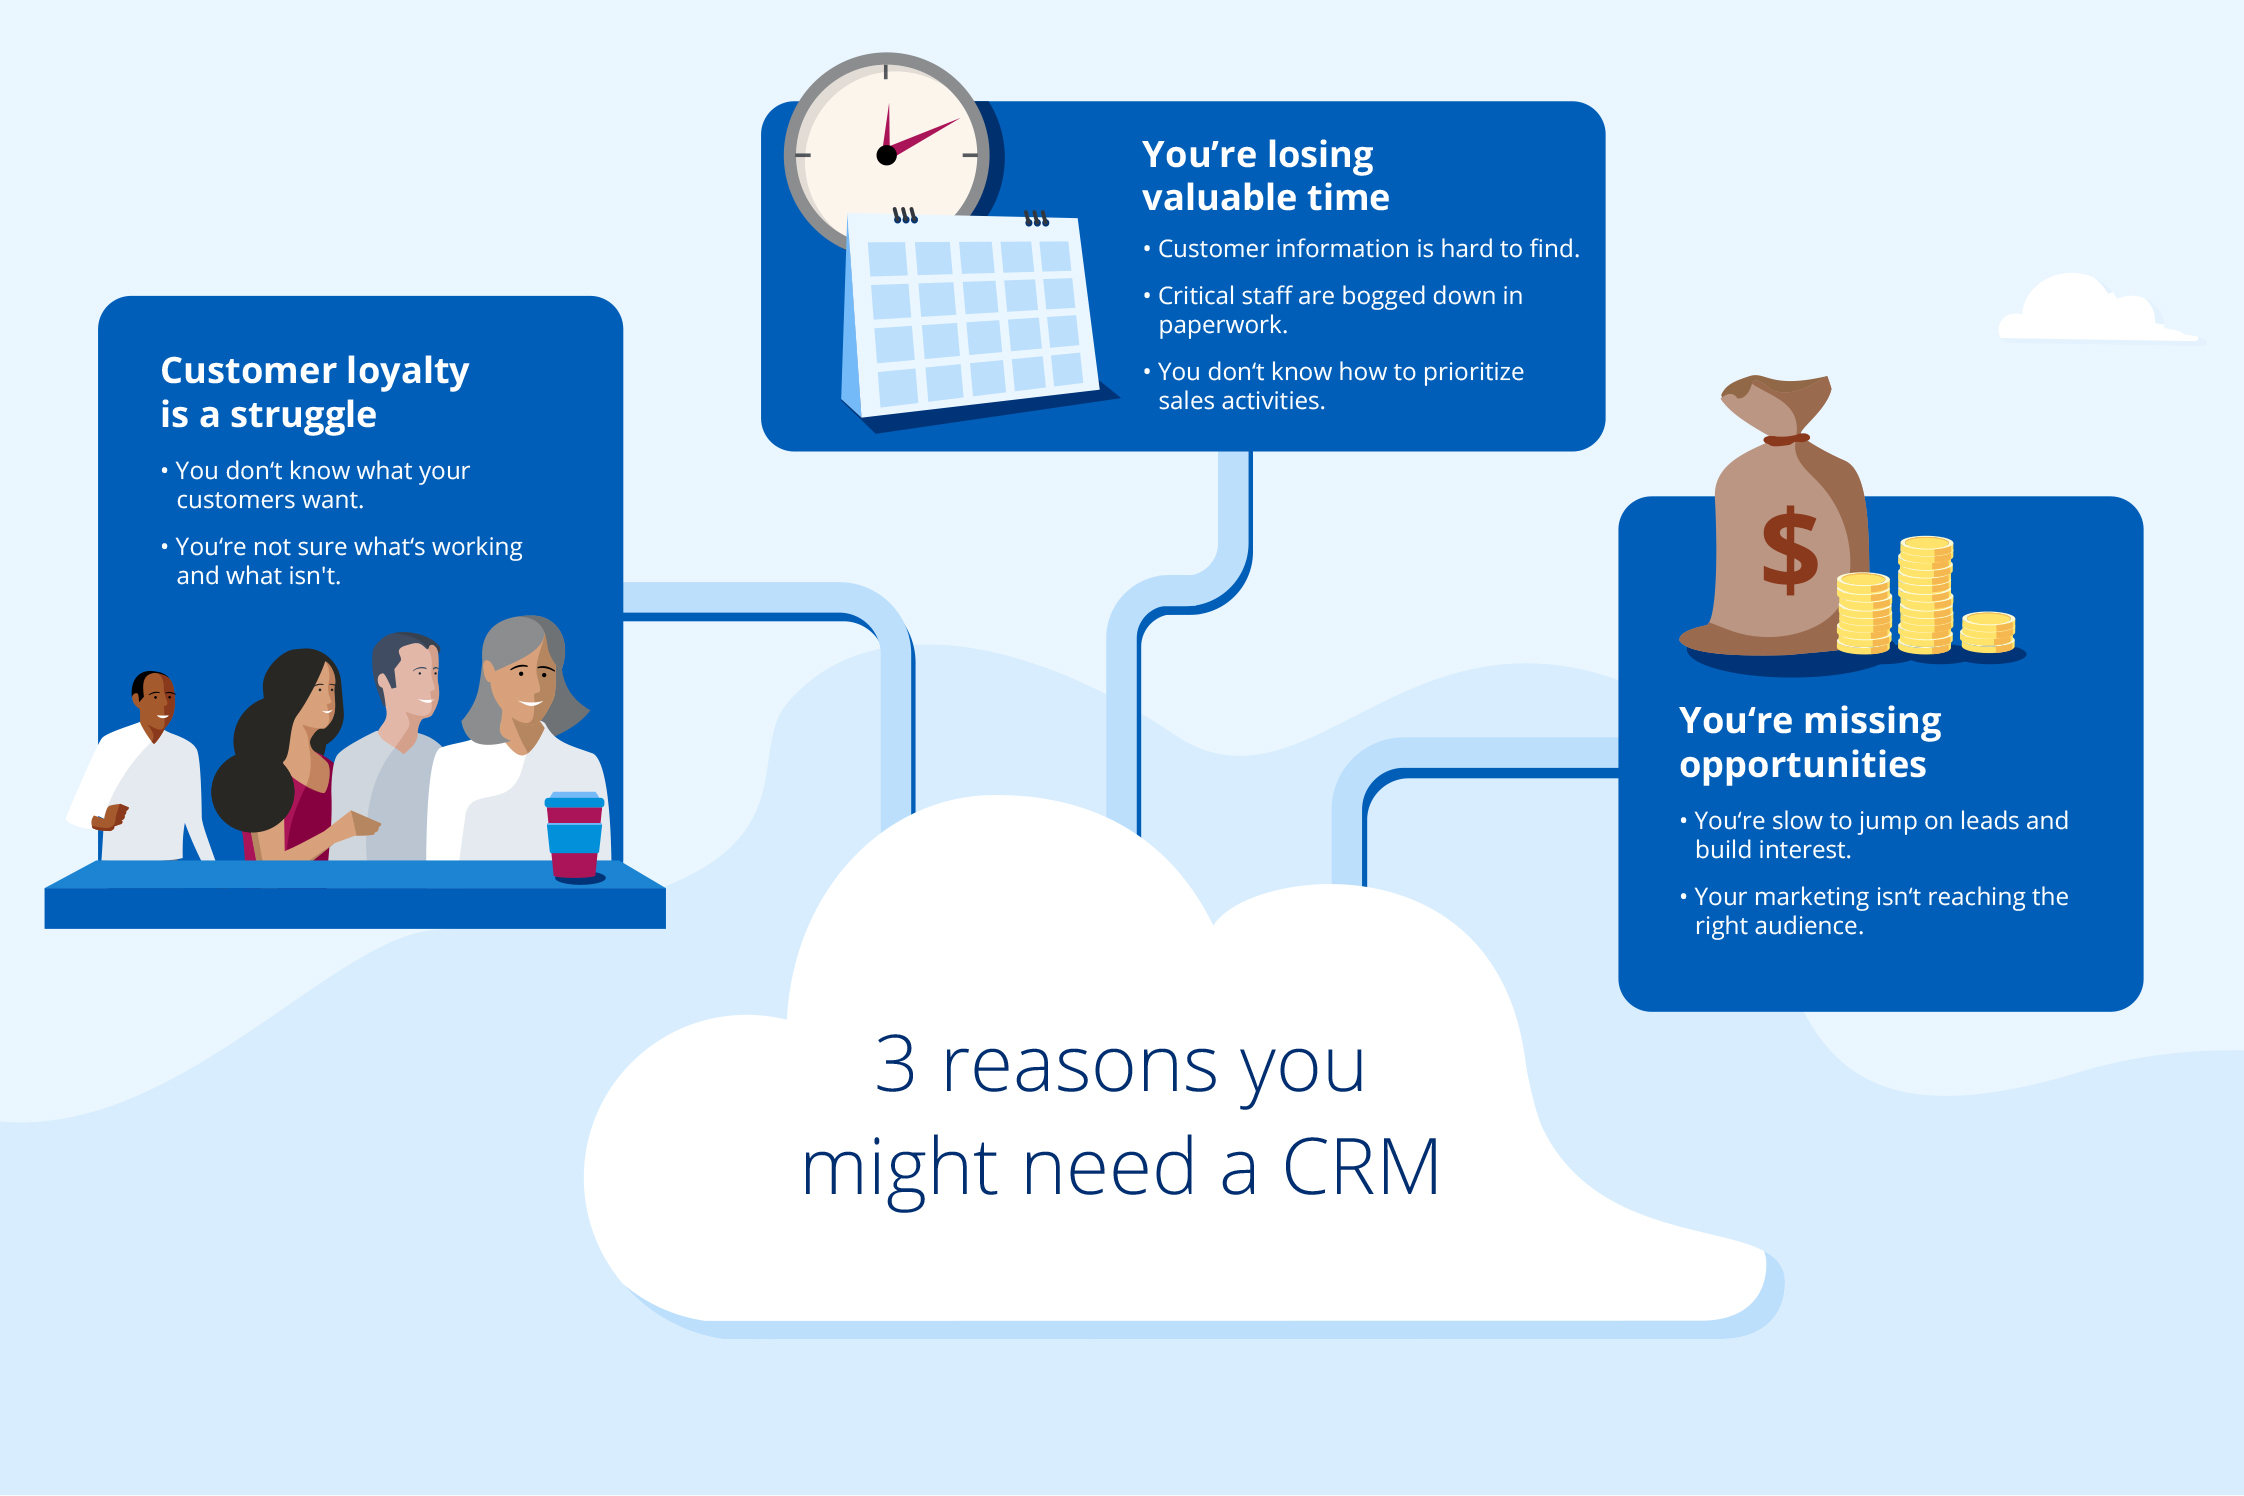 "3 reasons you might need a CRM" graphic